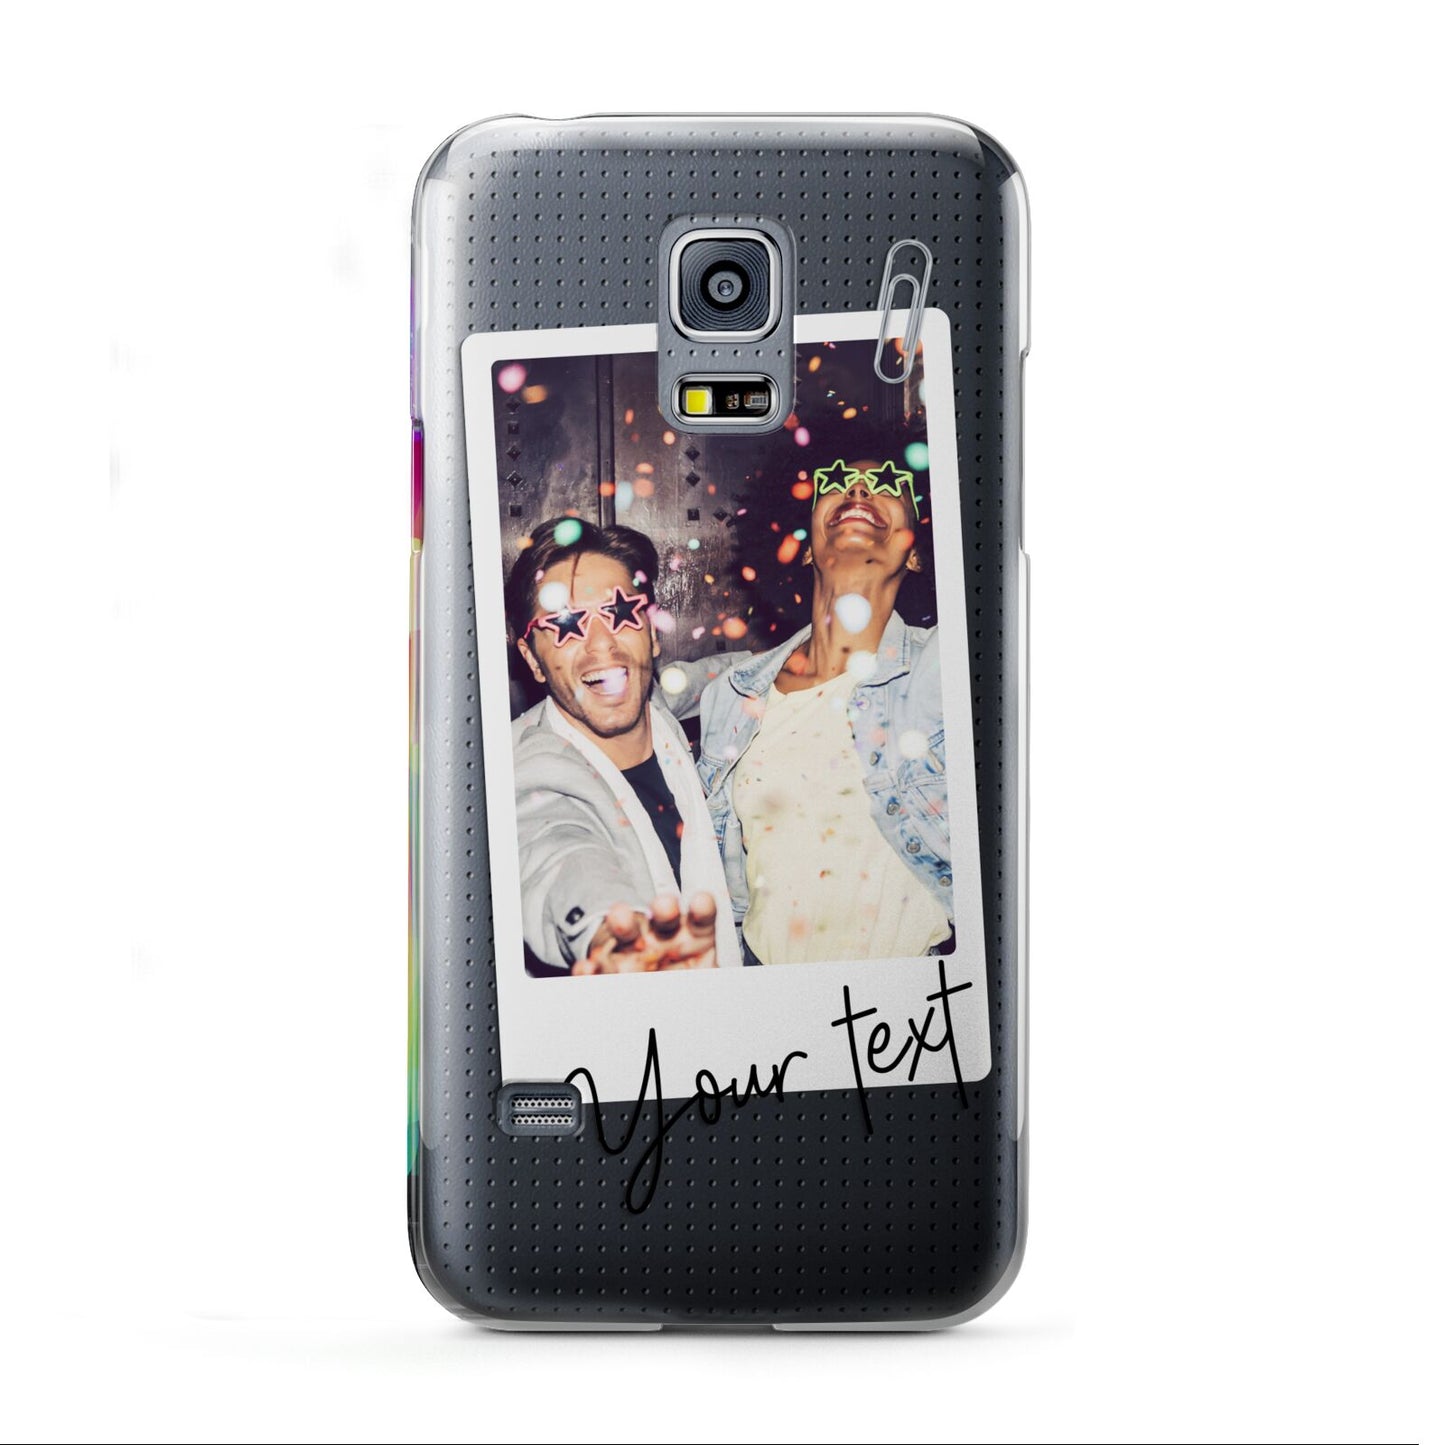 Personalised Photo with Text Samsung Galaxy S5 Mini Case